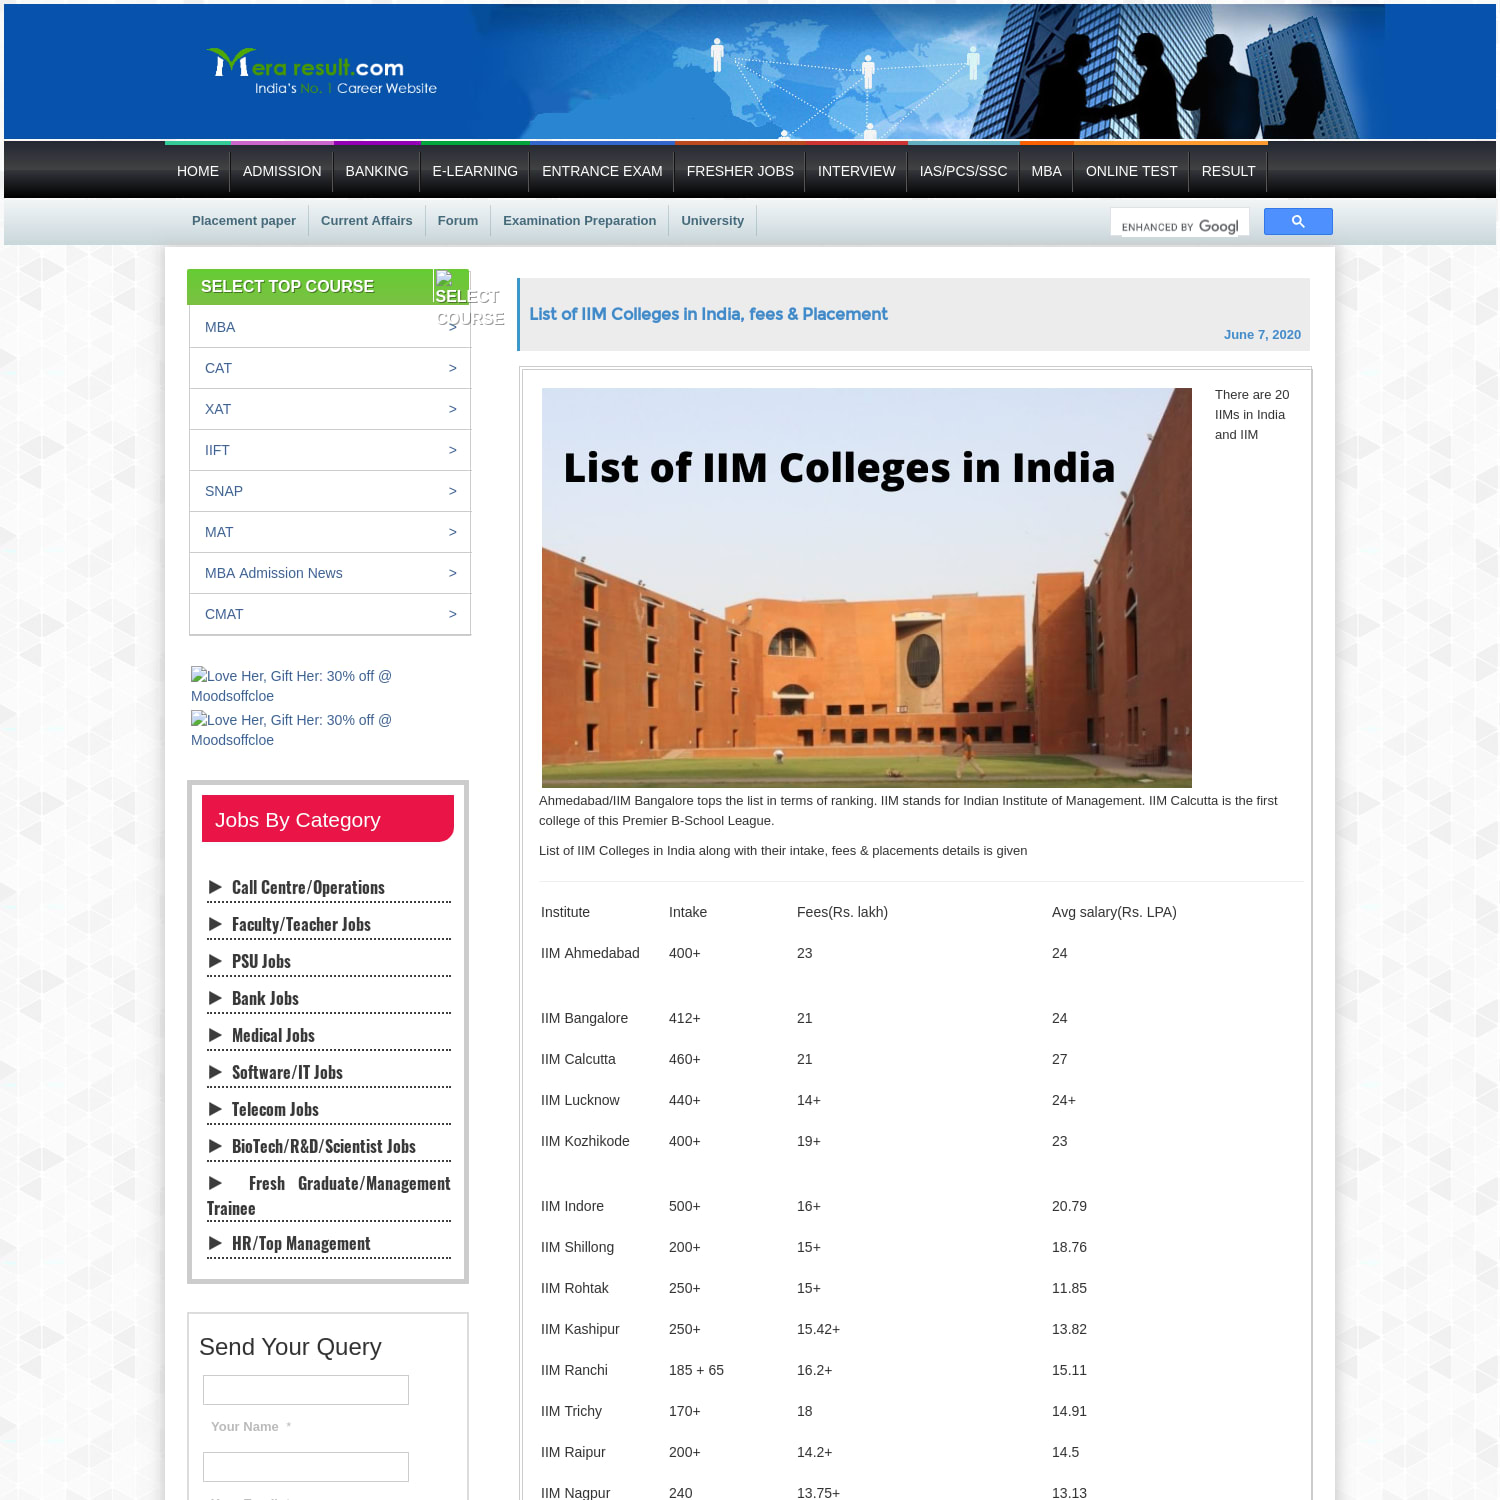 List of IIM Colleges in India, fees & Placement